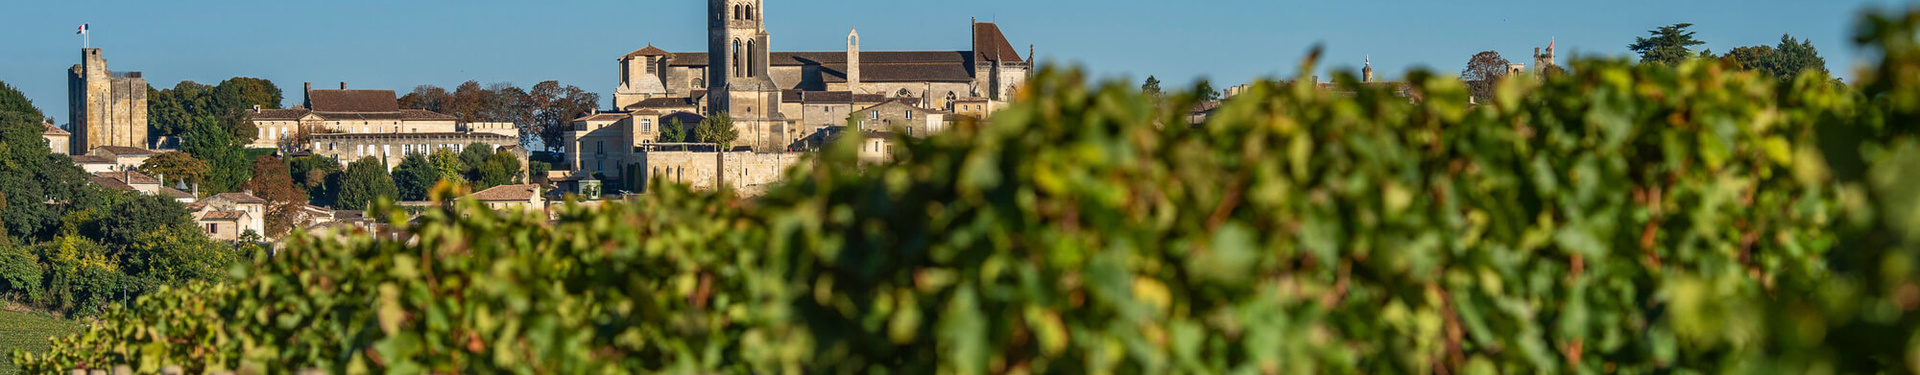 Quote request form - The road of the great wines of Bordeaux | Nature Occitane